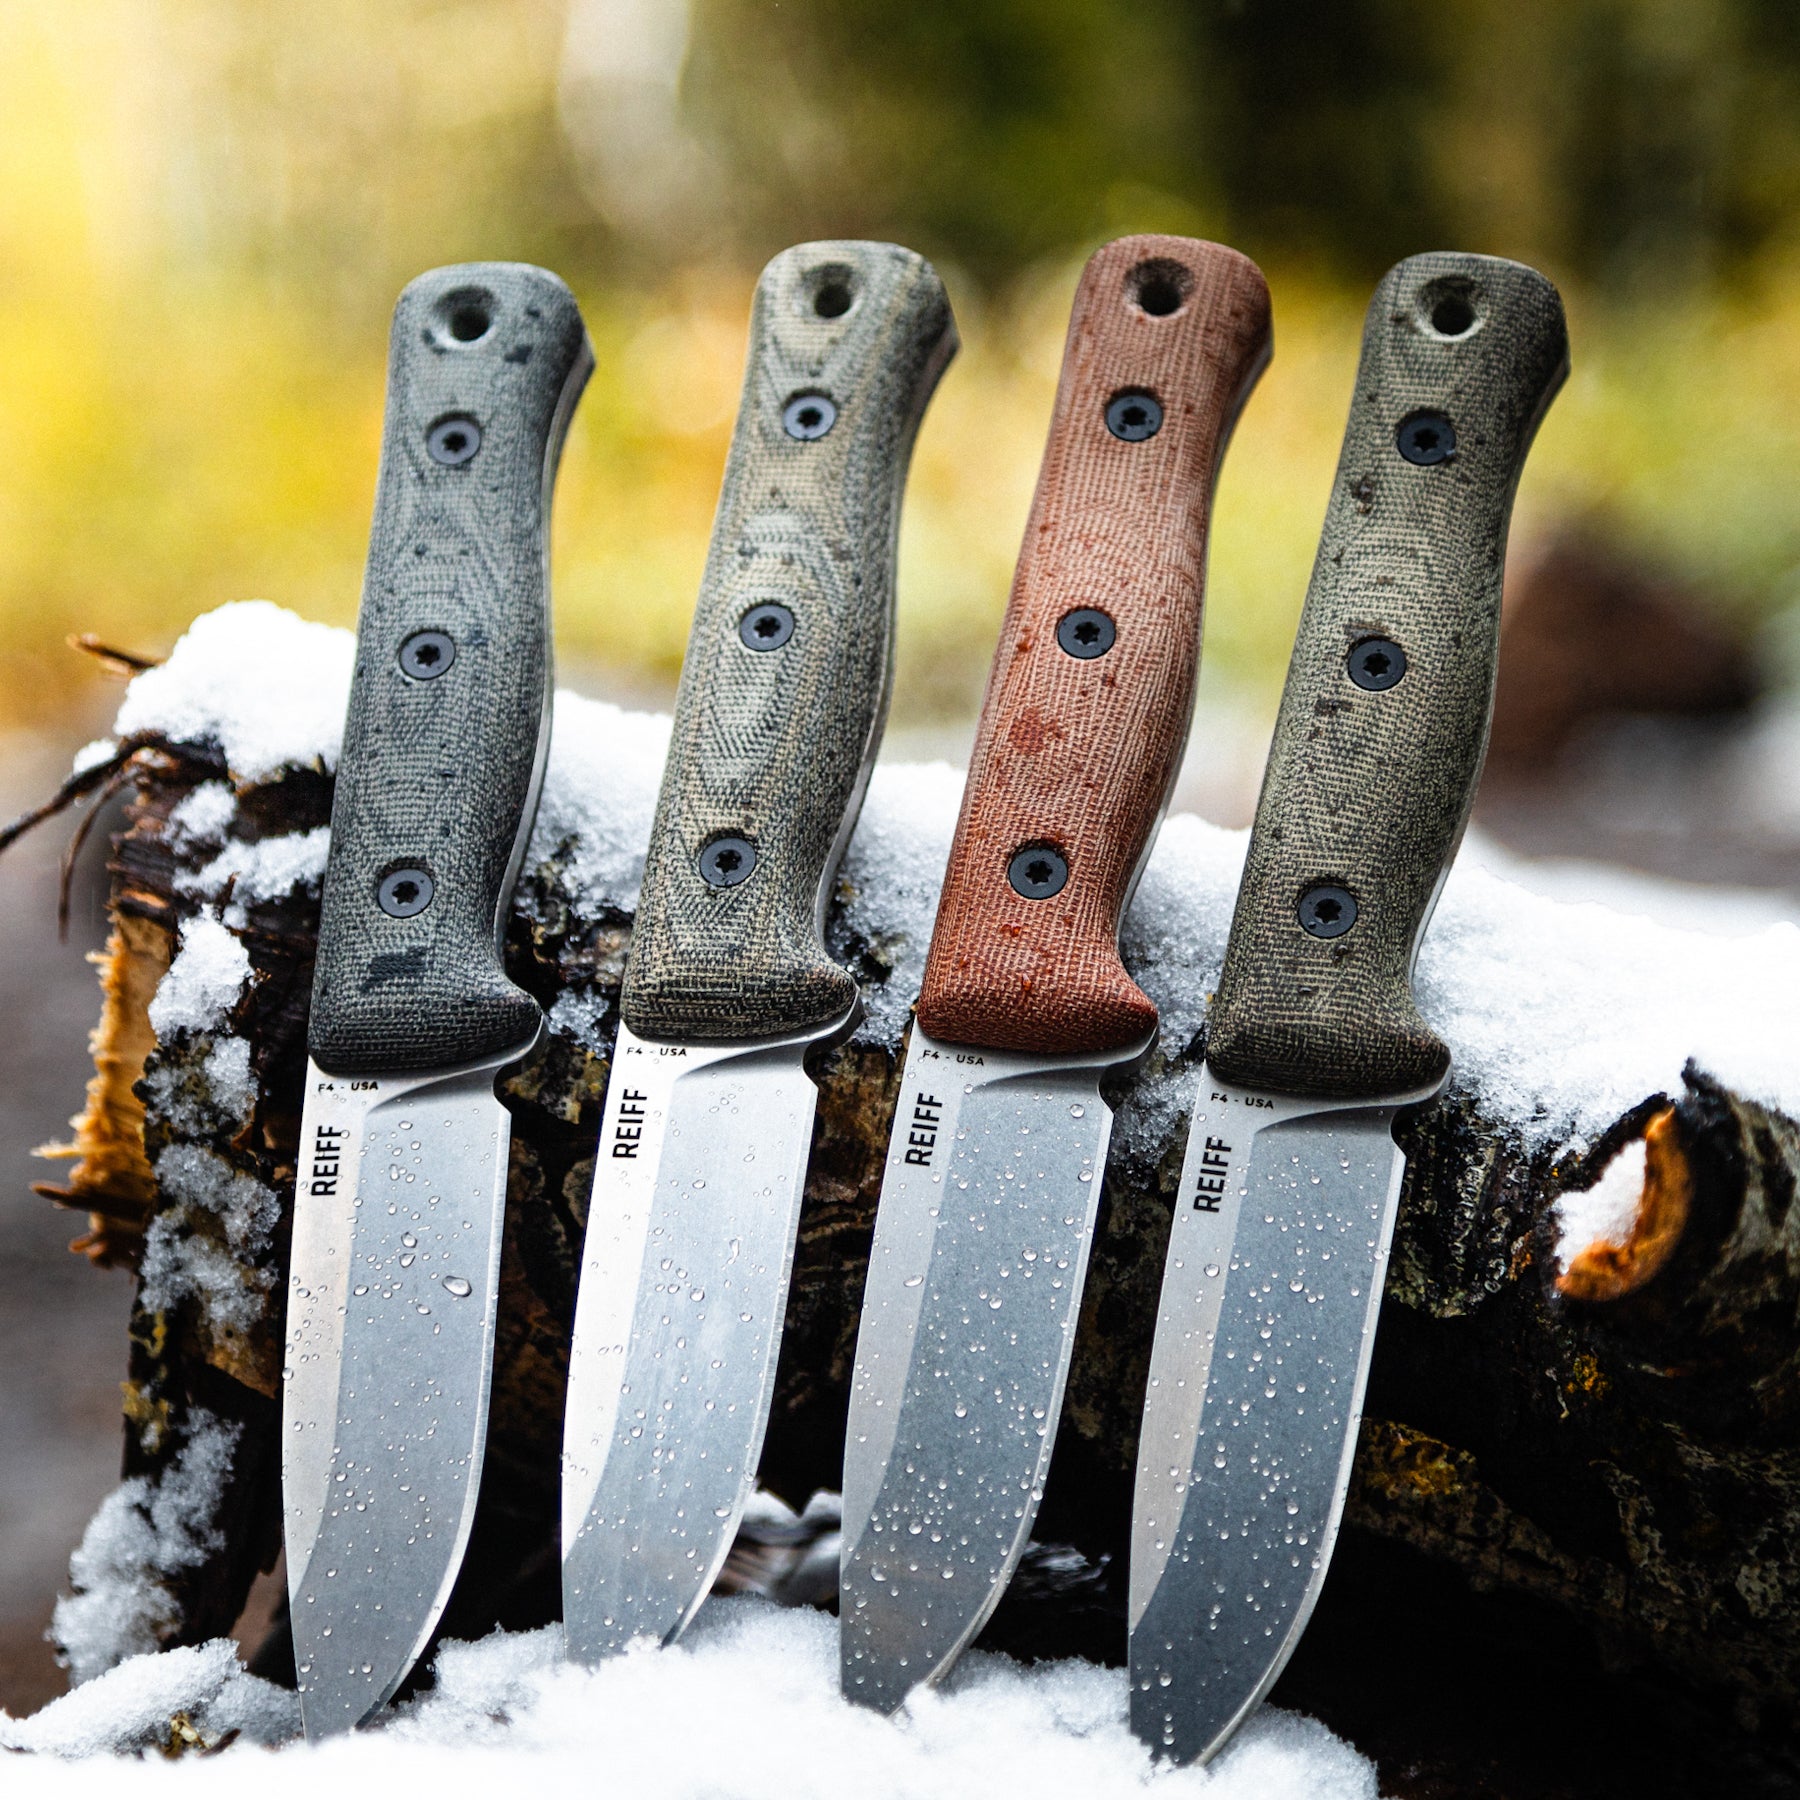 The Best Survival Knives in 2023 - Tested and Reviewed